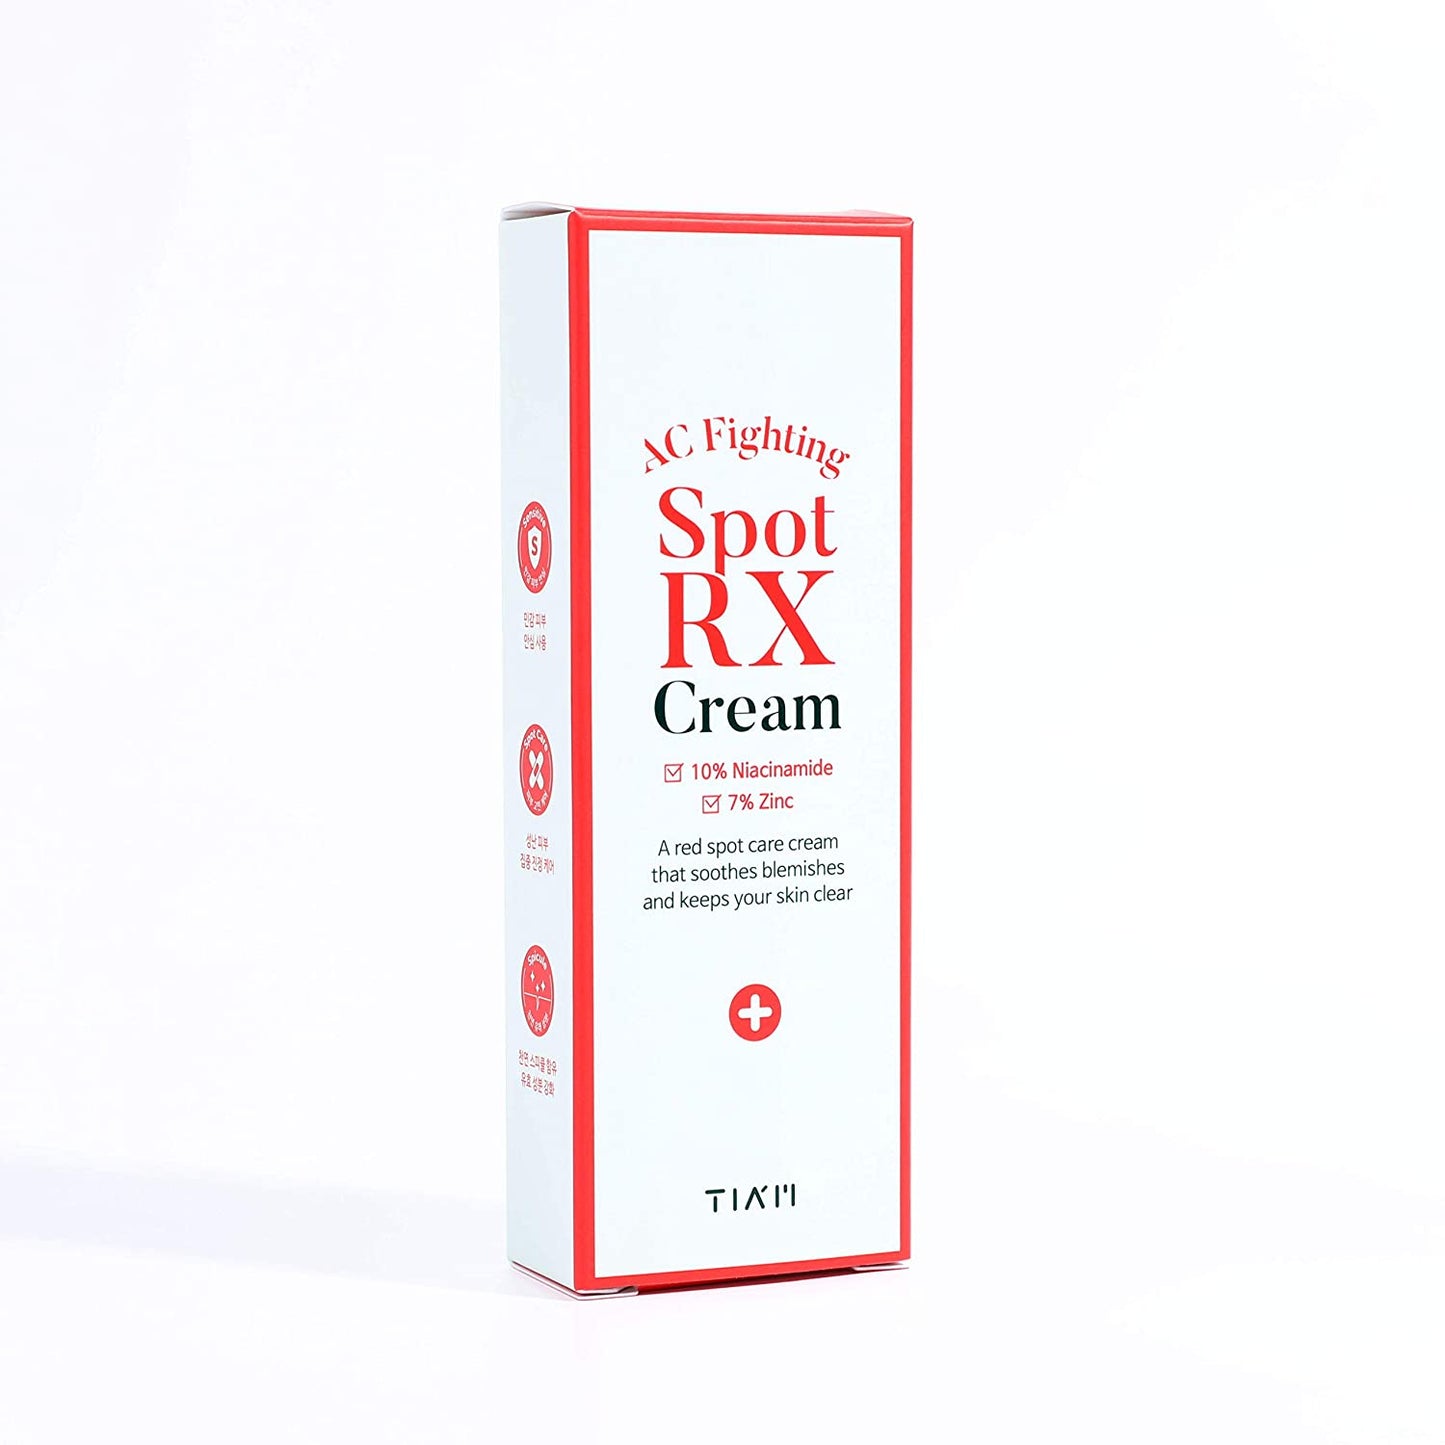 TIAM AC Fighitng Spot RX Cream, Acne-Prone Skin, Acne Spot Treatment, Intensive Nourishing and Calming for Dry, Red-Looking Skin After a Blemish, 1 Oz